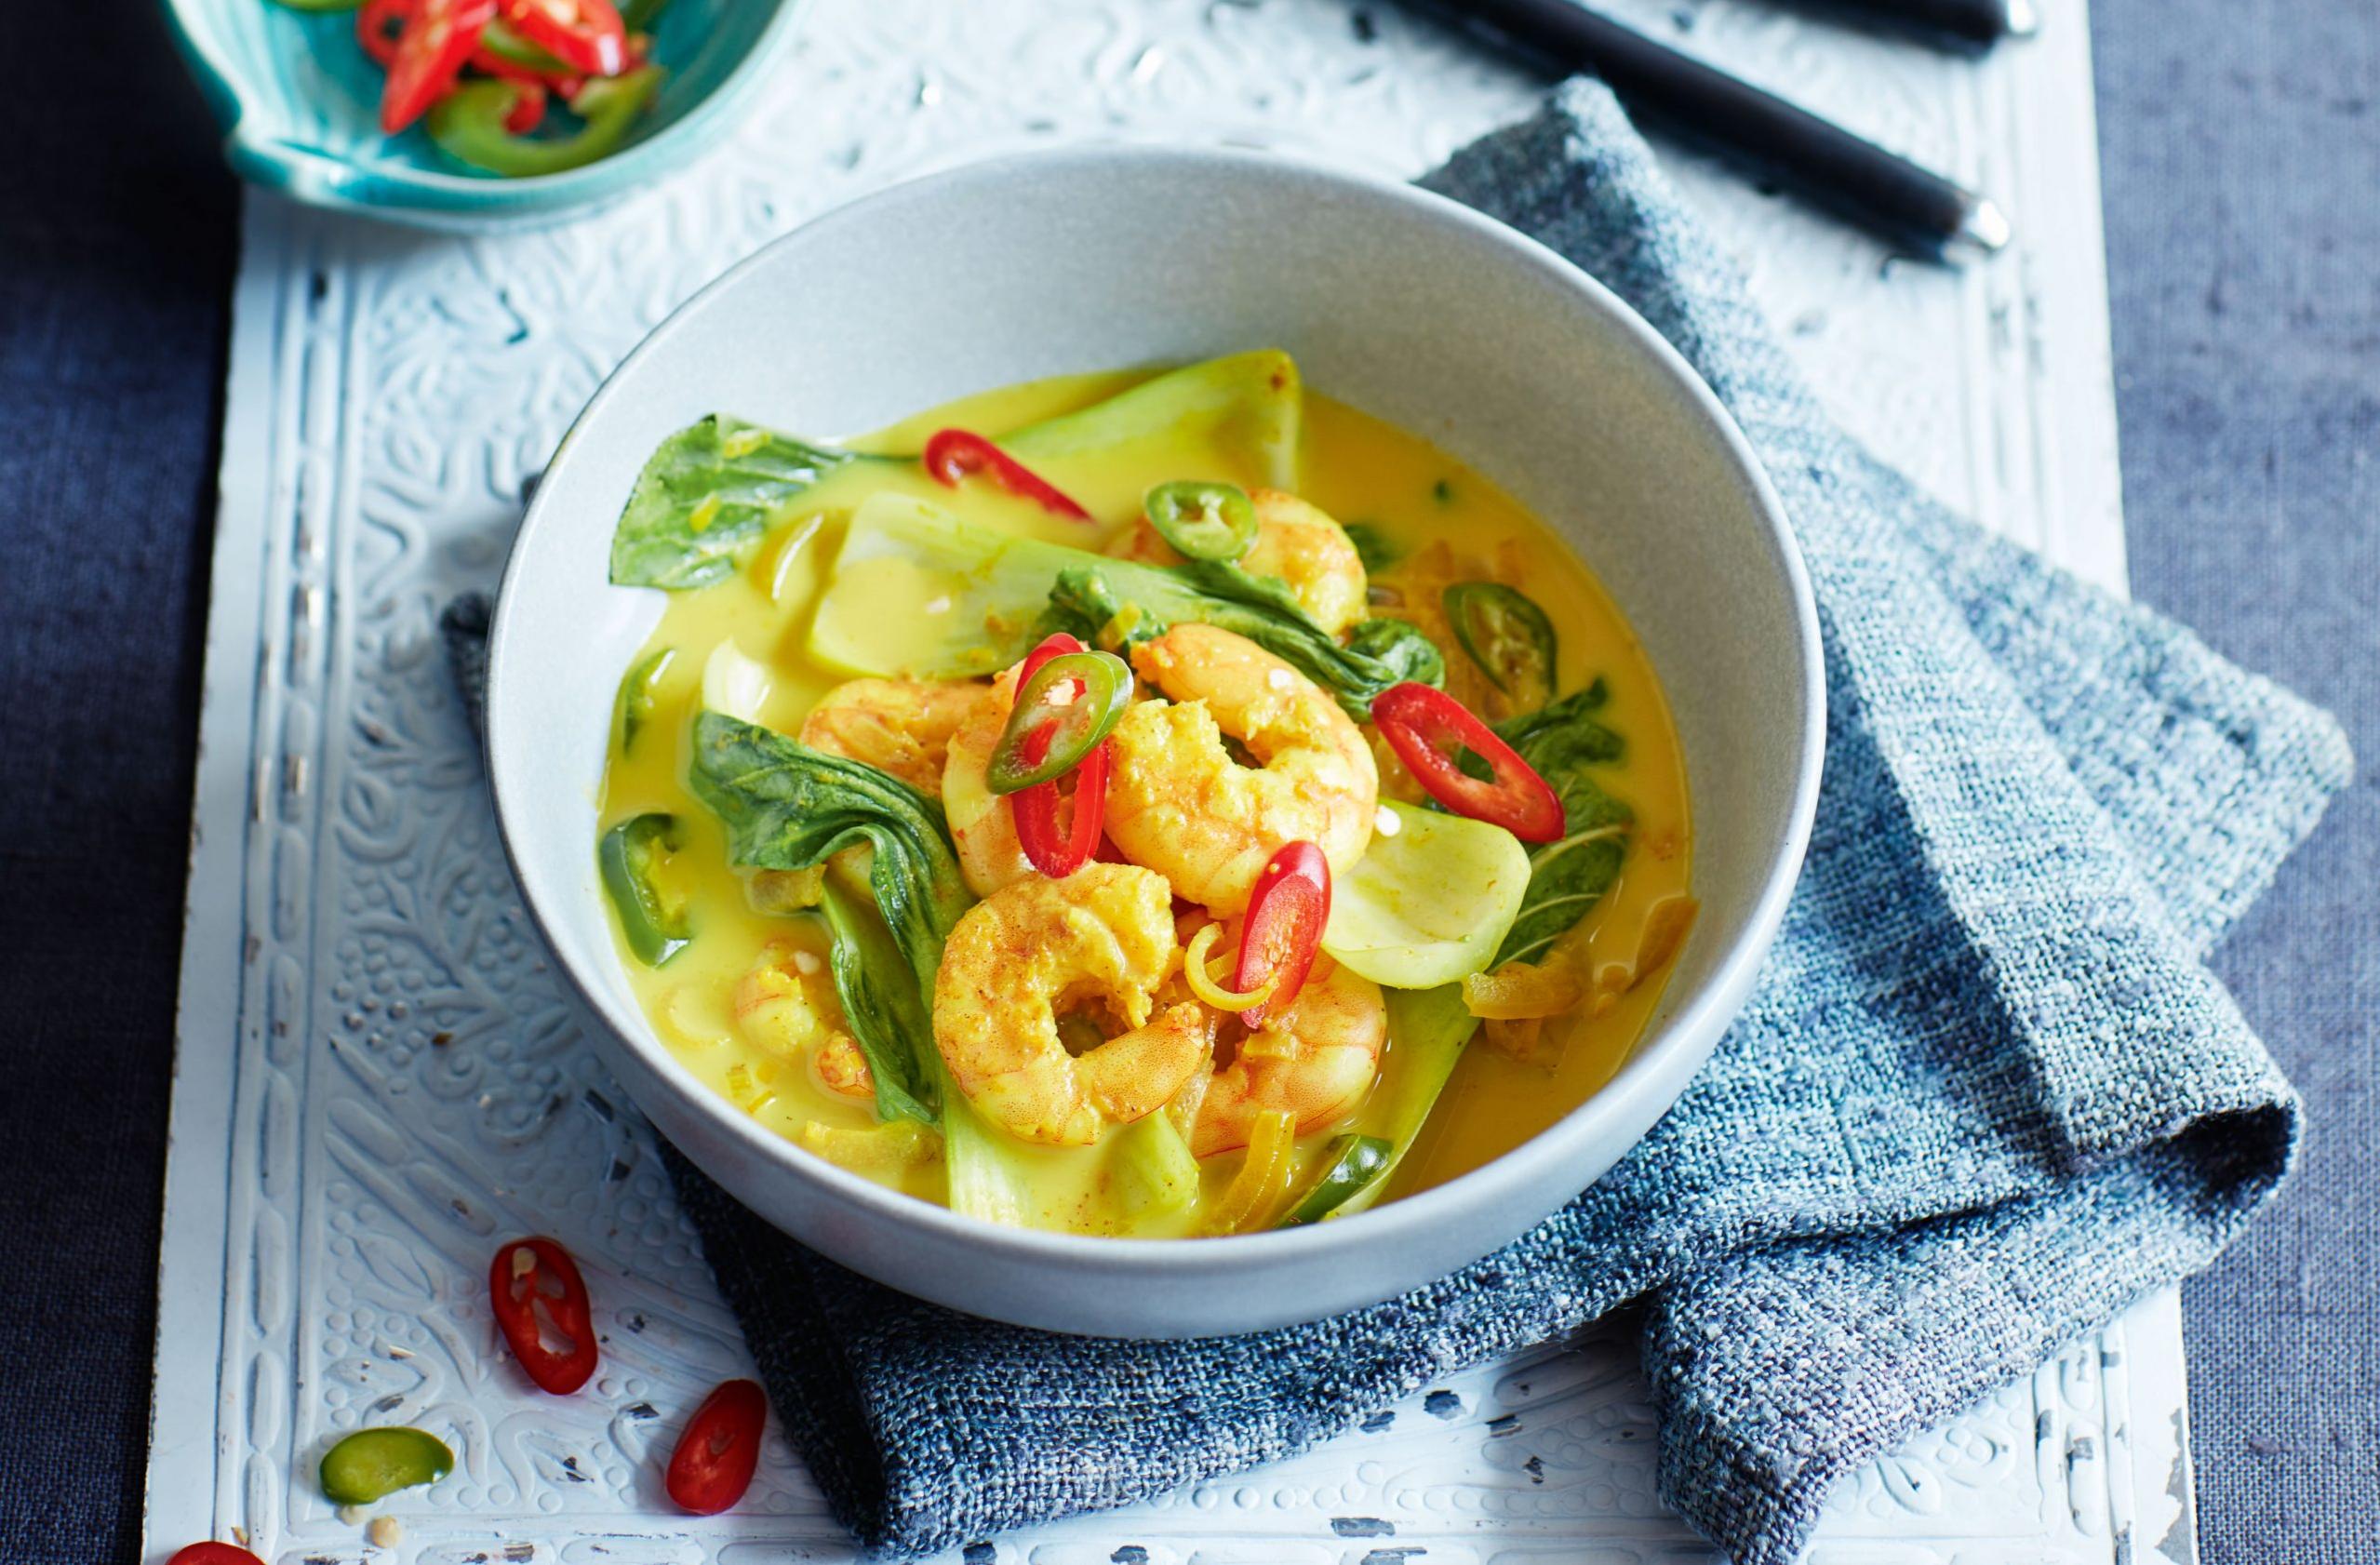  Get ready to transport your taste buds to the streets of Vietnam with this mouthwatering seafood curry.